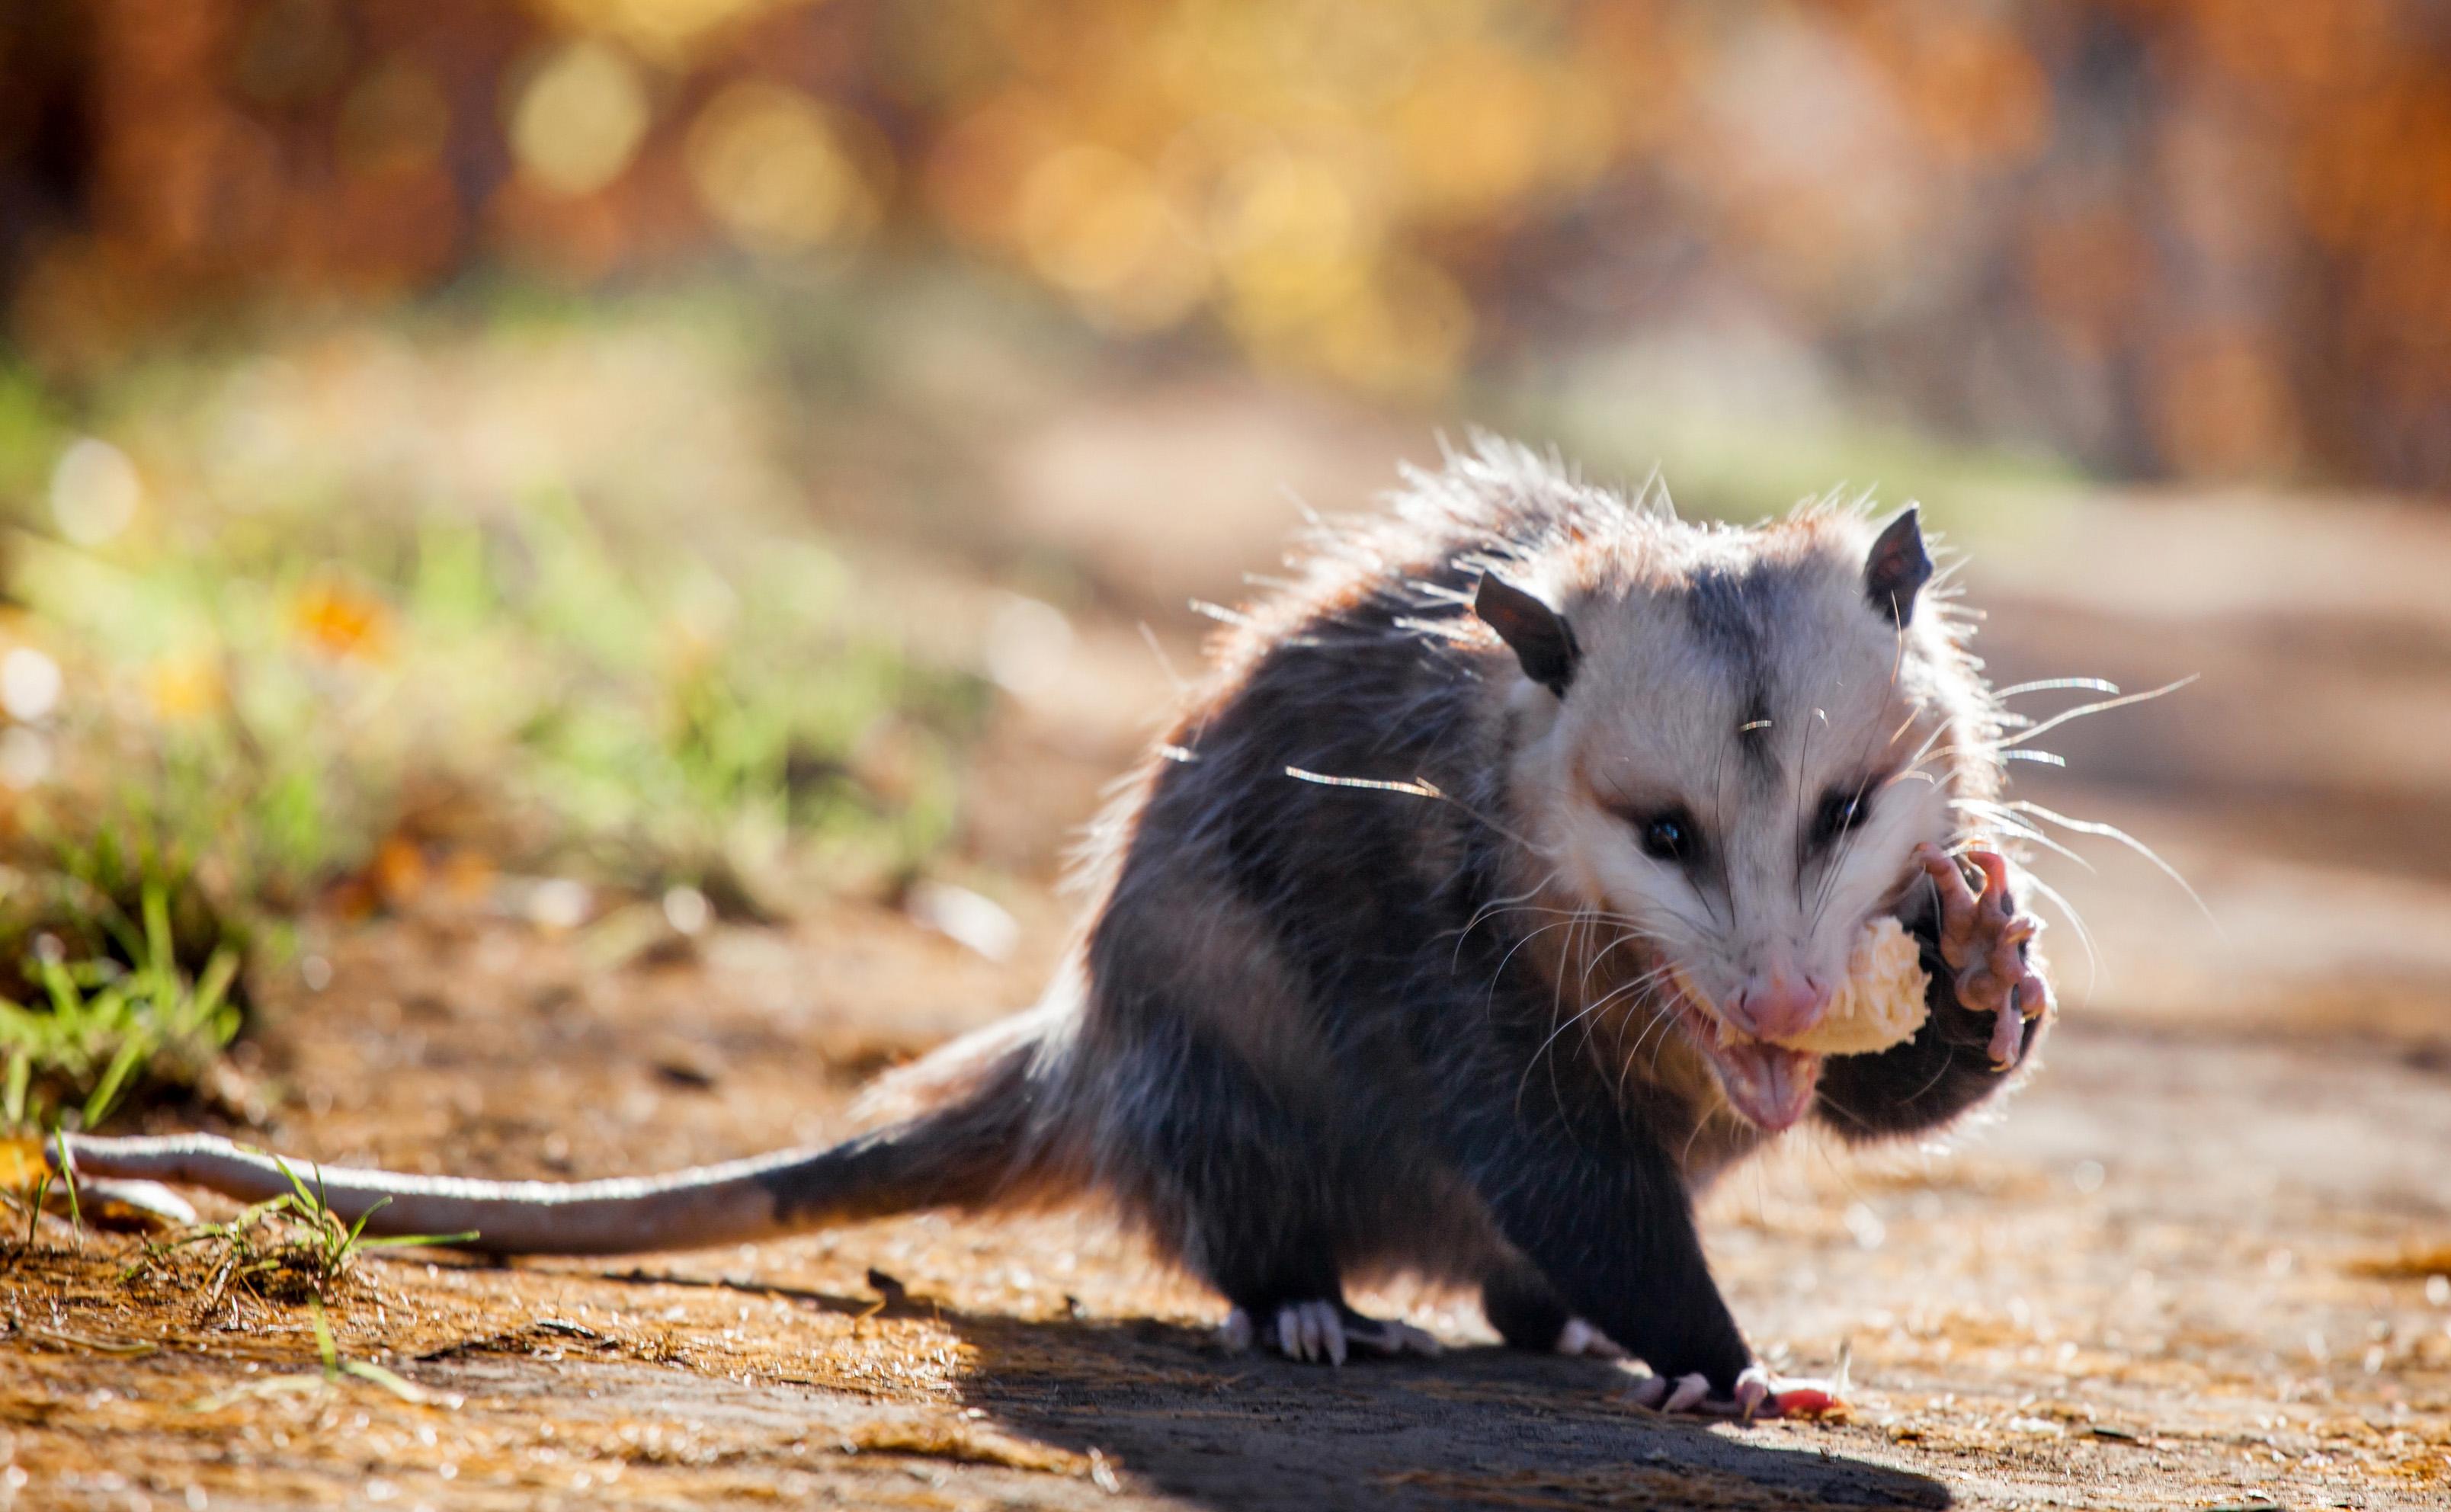 An opossum eating something on the trail.